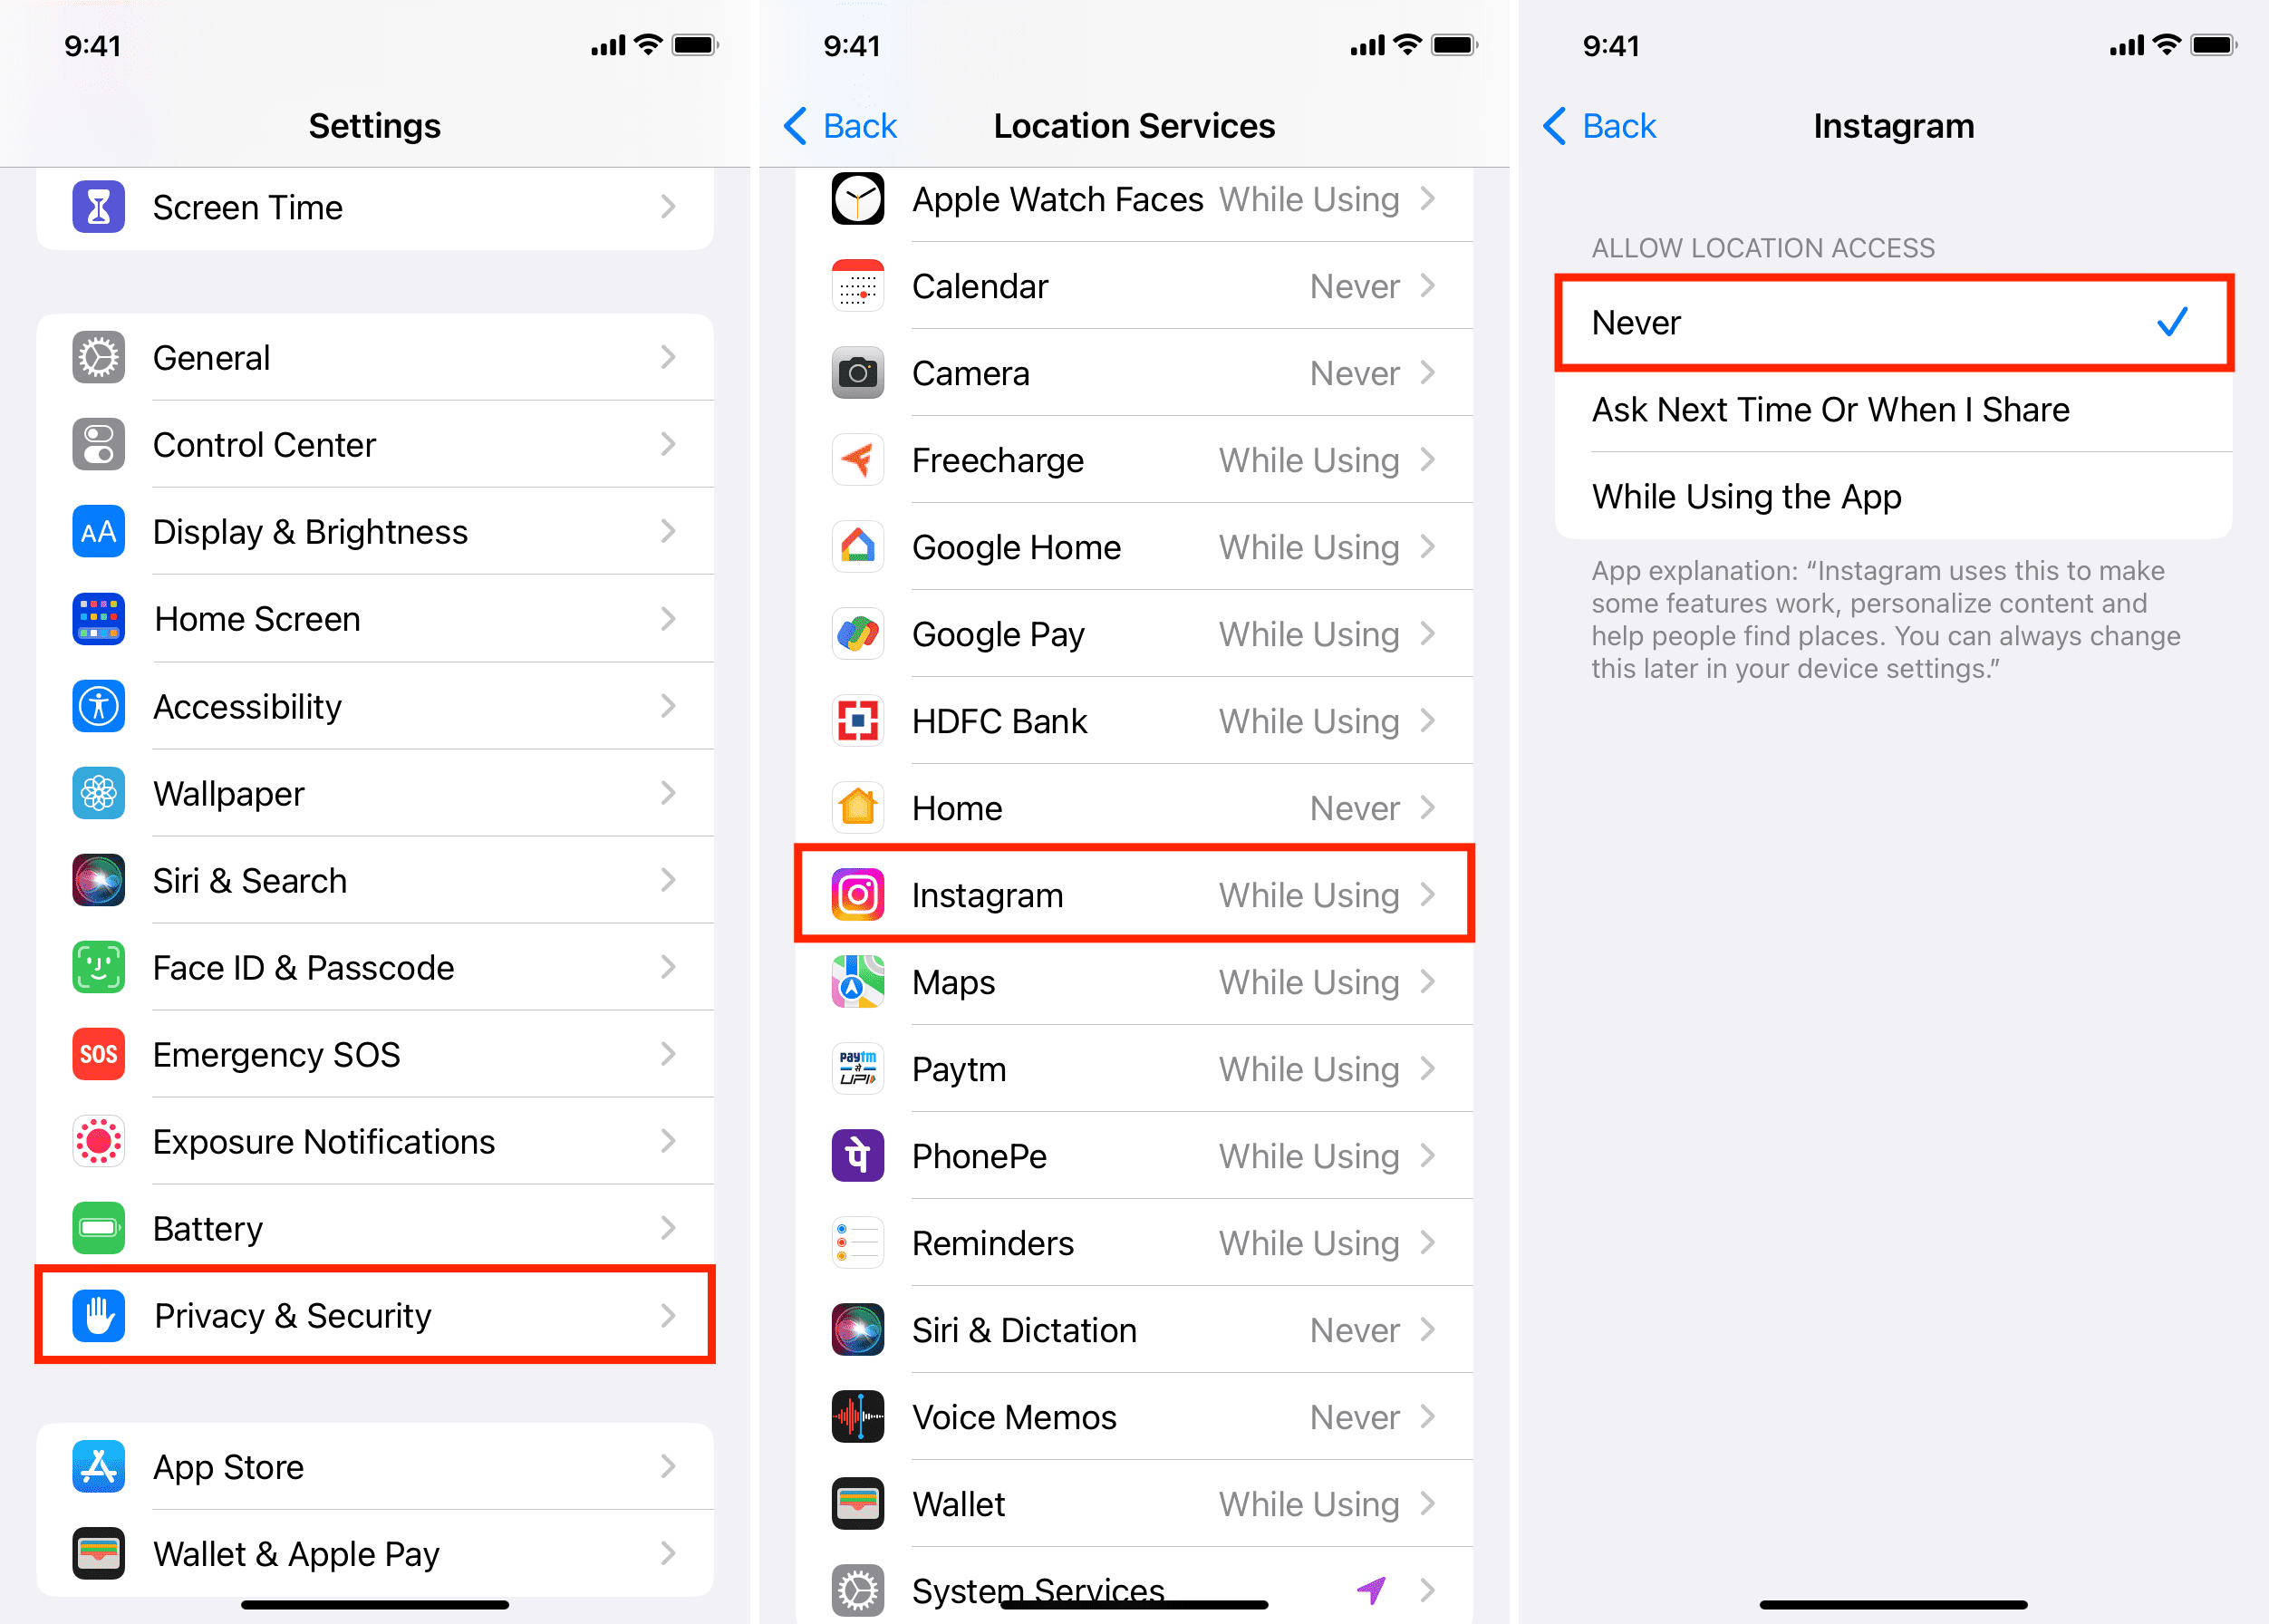 How can I remove my location?